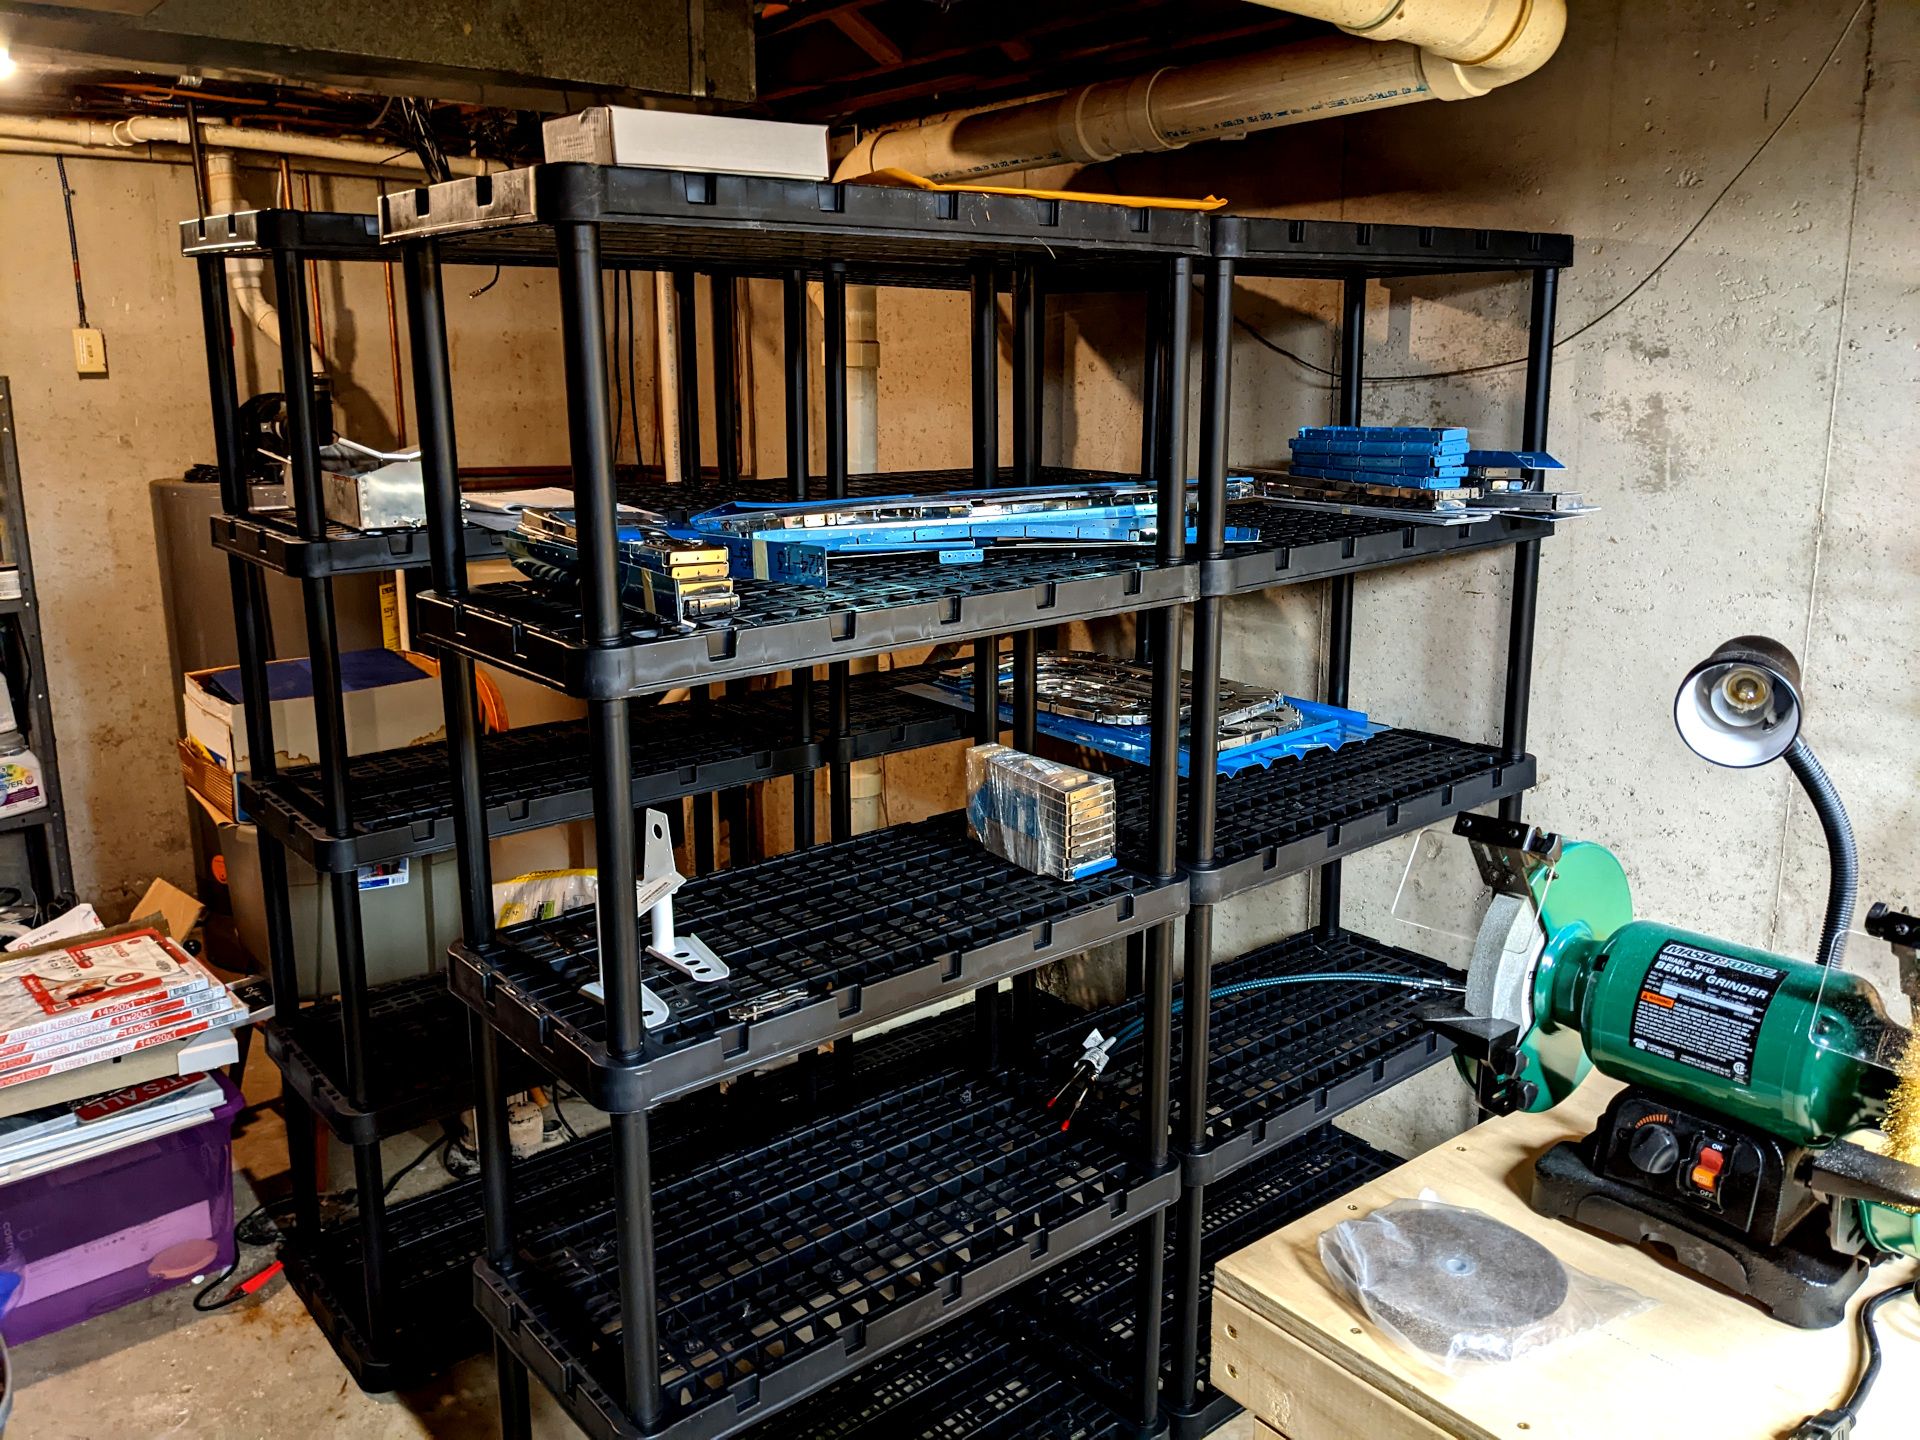 Four freestanding shelves with aluminum airplane parts on them